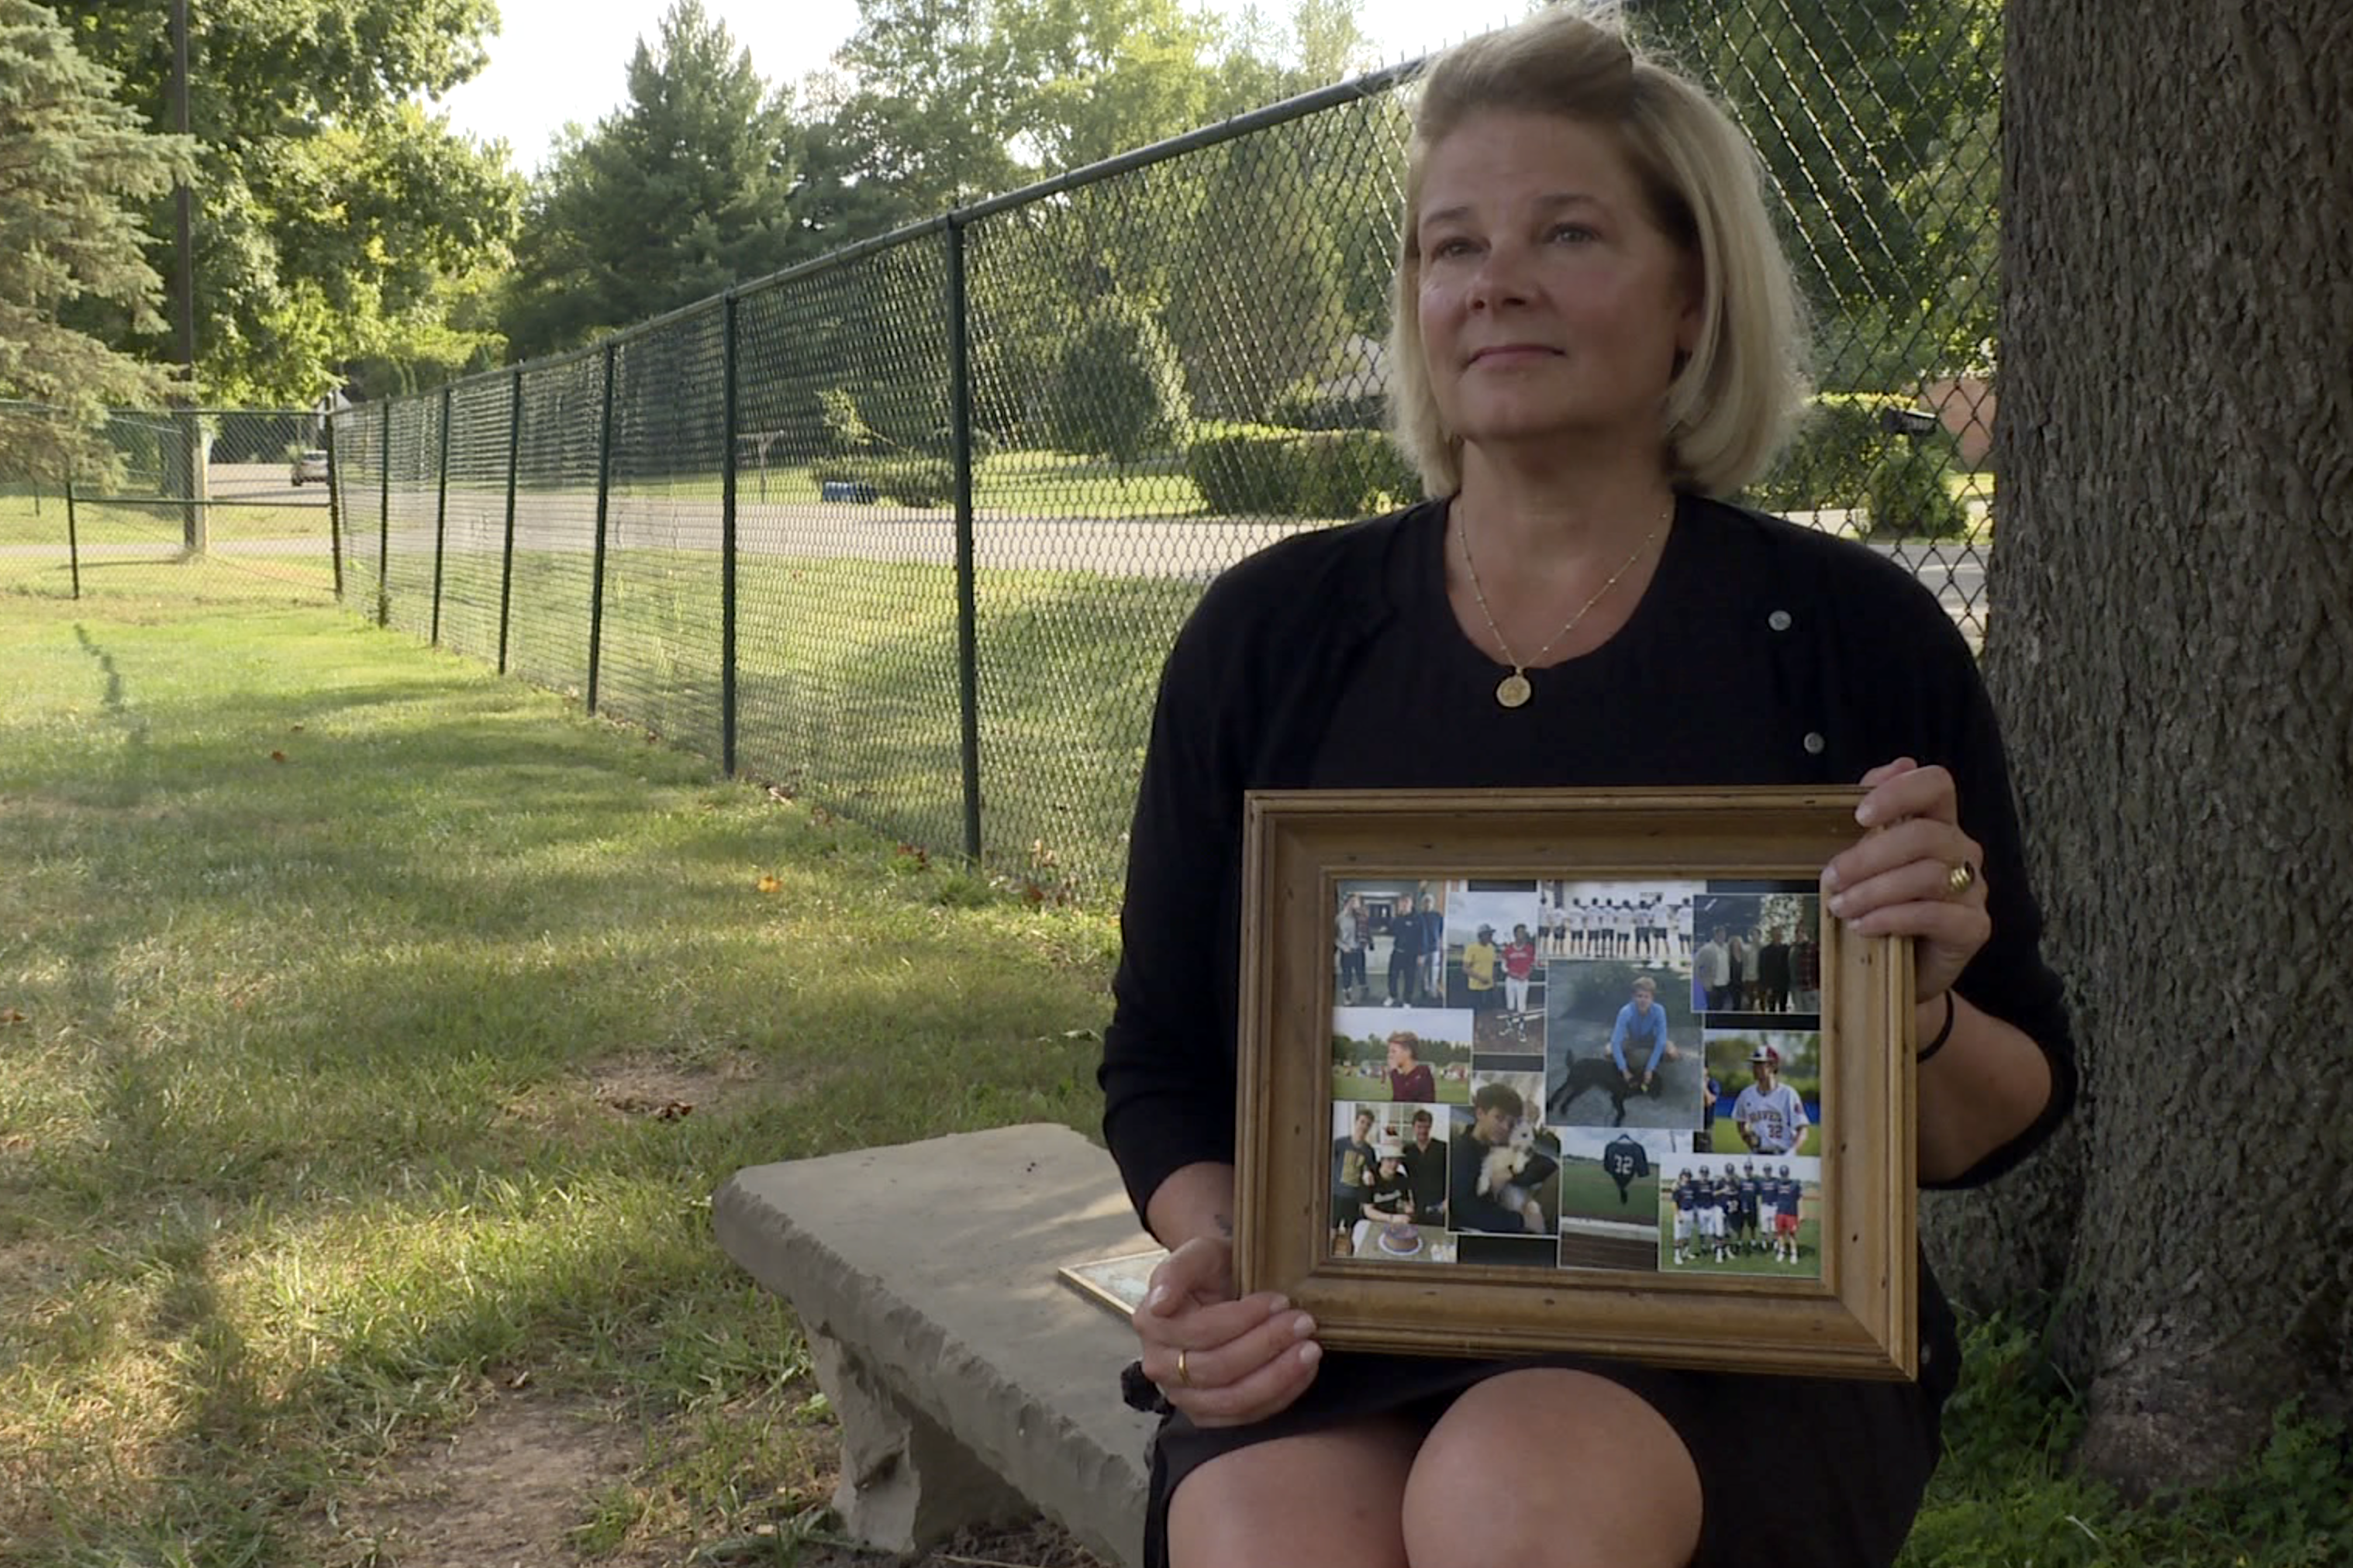 Amy Powell, who lost her son Cameron to a fentanyl overdose